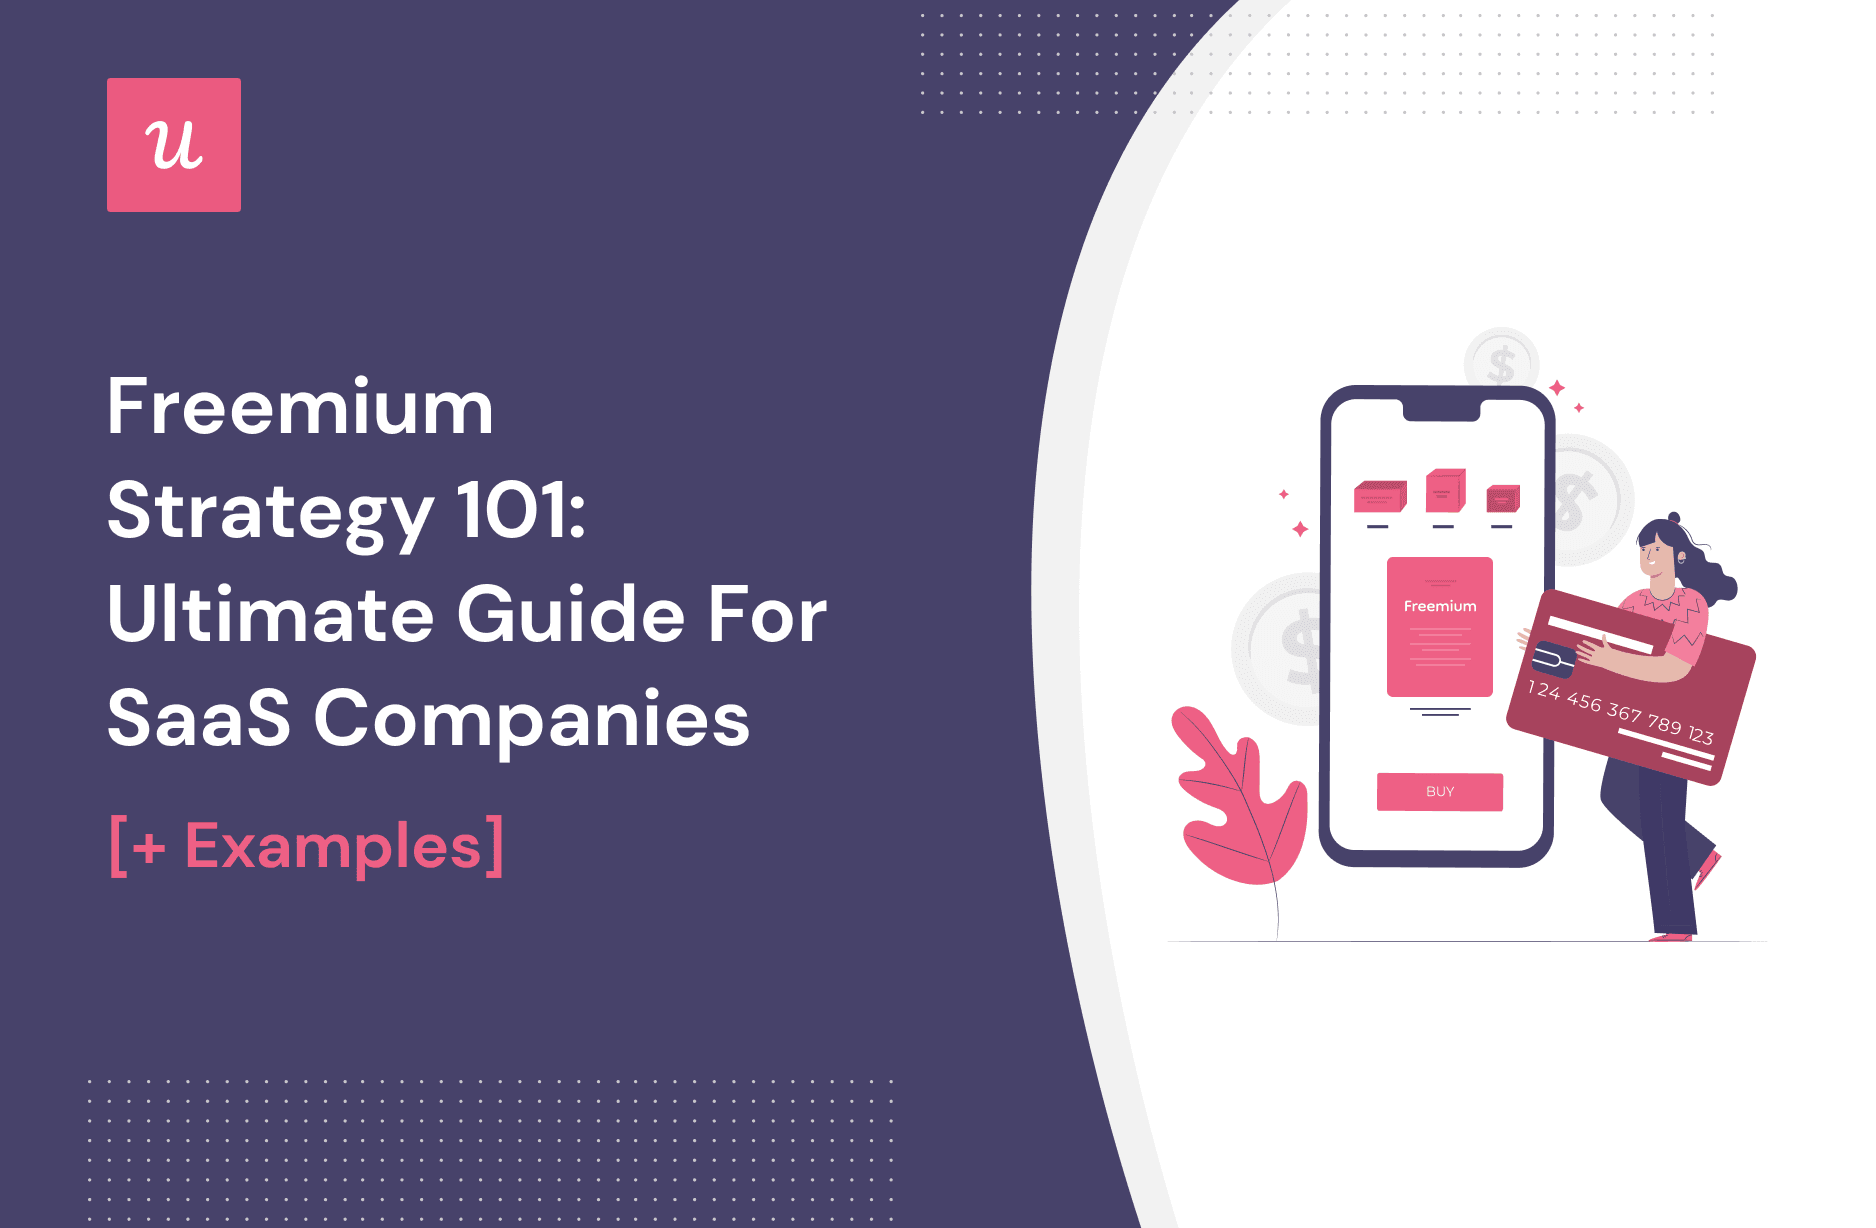 Freemium Strategy 101: Ultimate Guide for SaaS Companies [+ Examples] cover